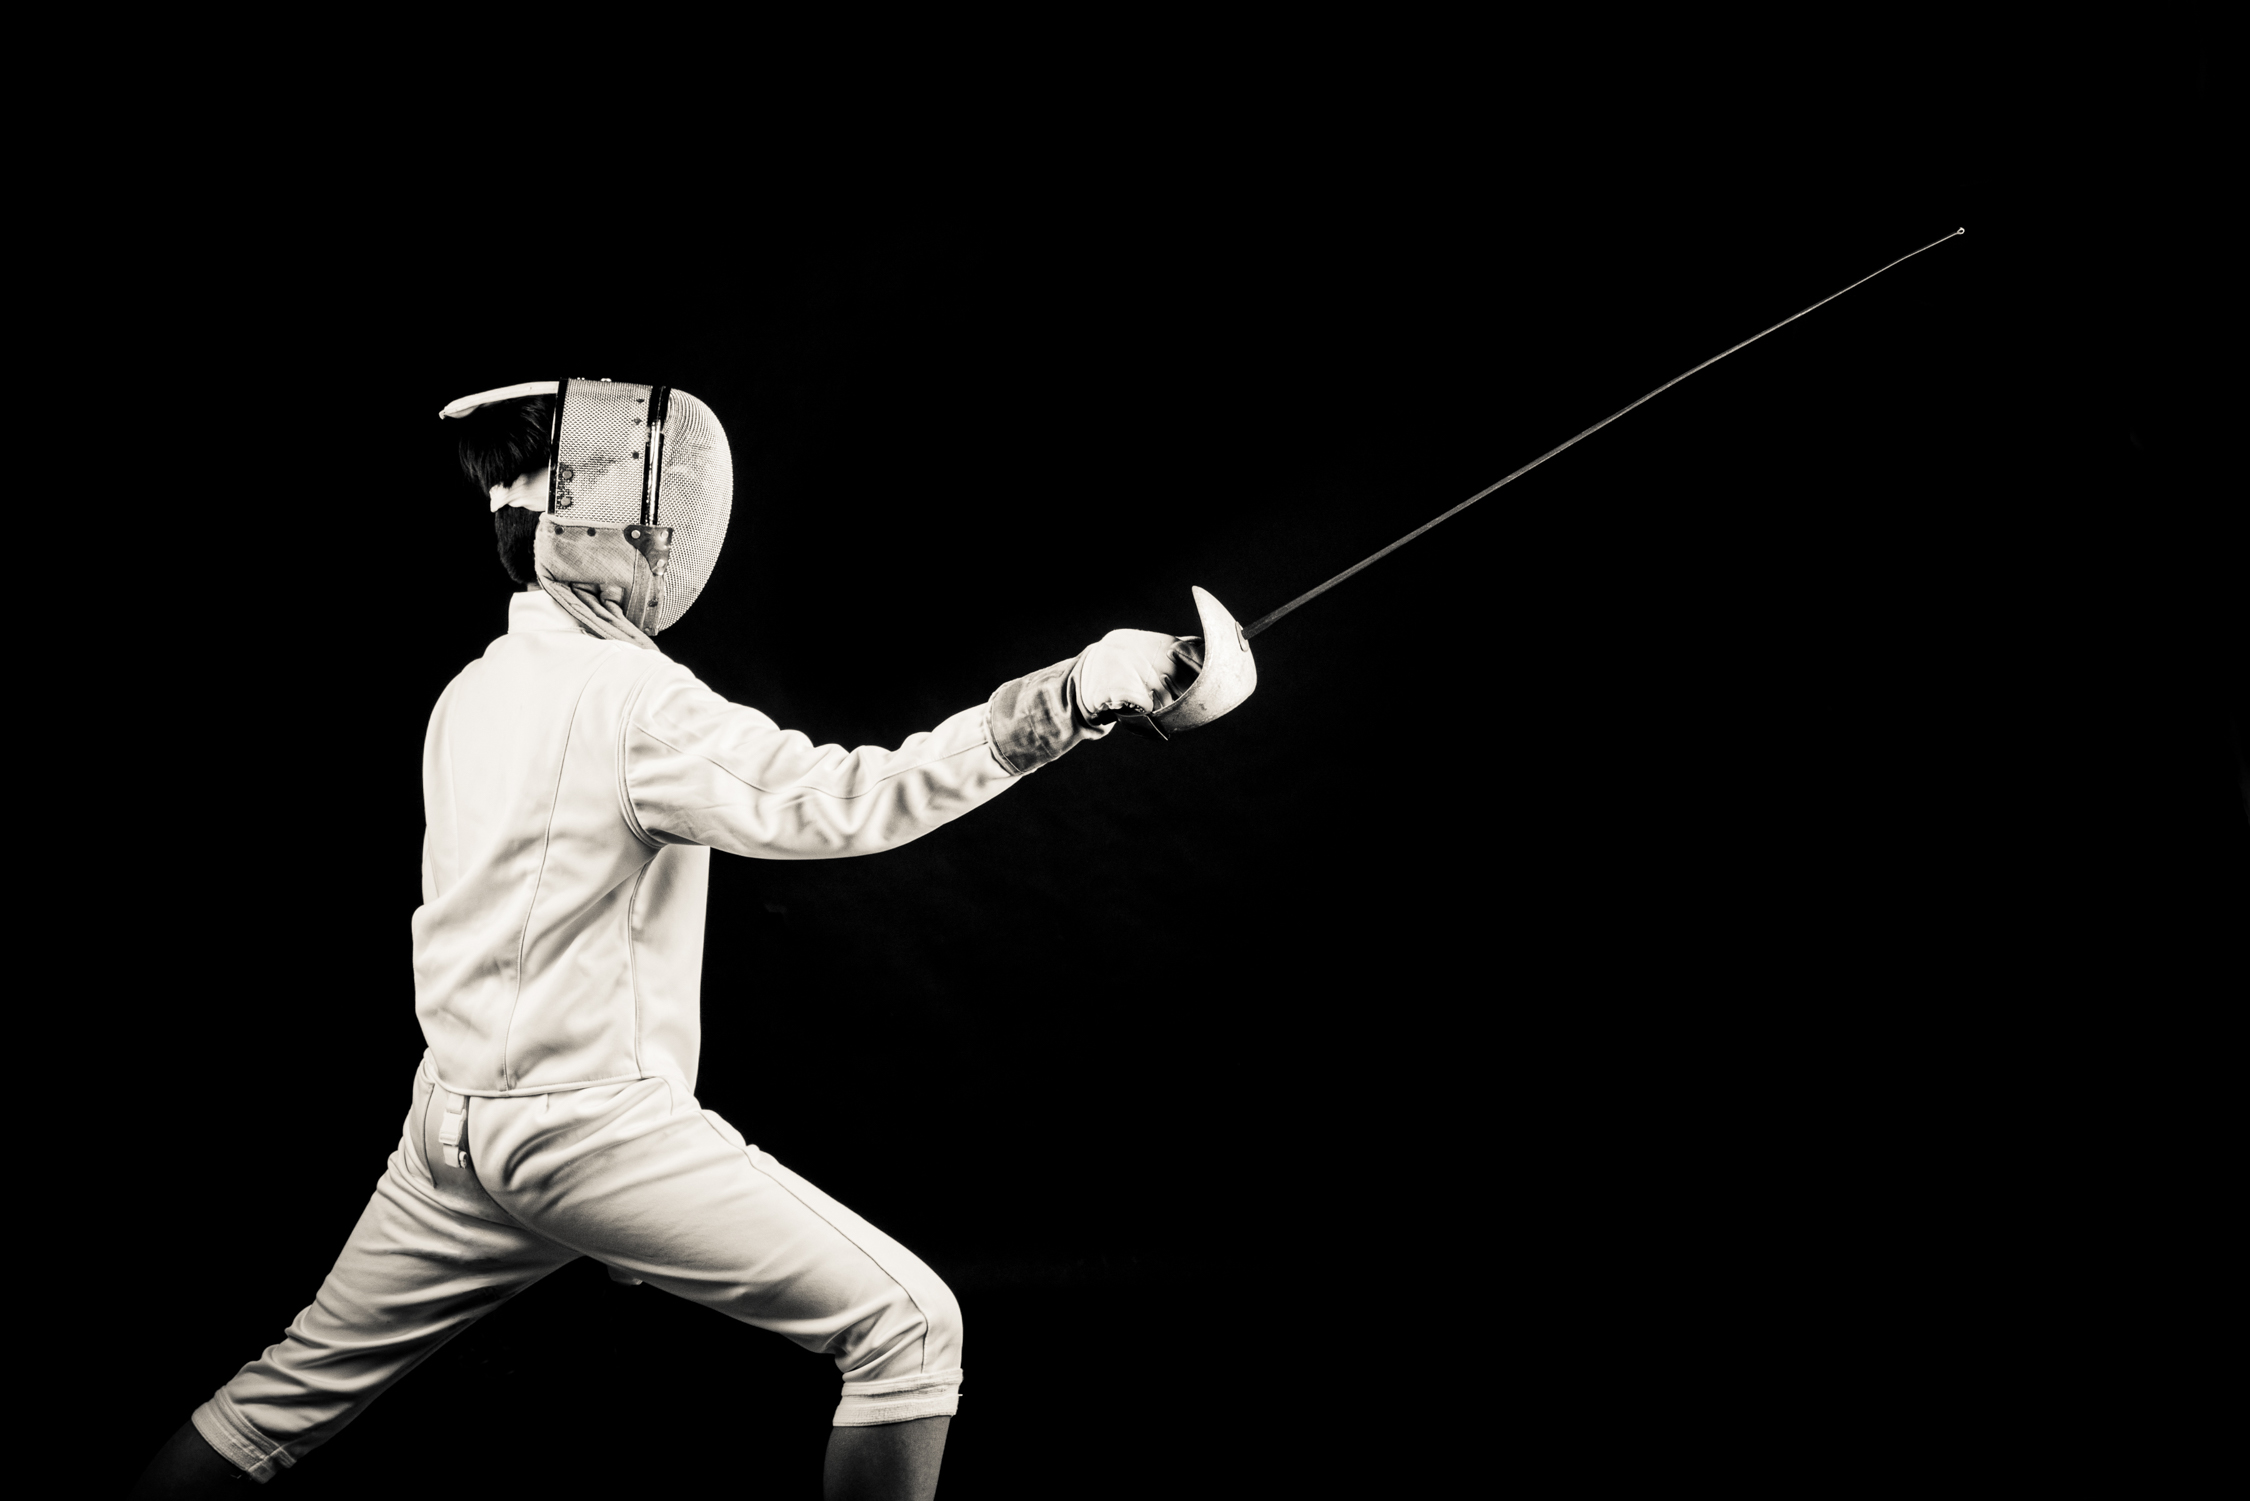 Professional fencer fencing in a photography studio setting during a corporate photoshoot in Singapore, White Room Studio. Credit: White Room Studio Pte Ltd